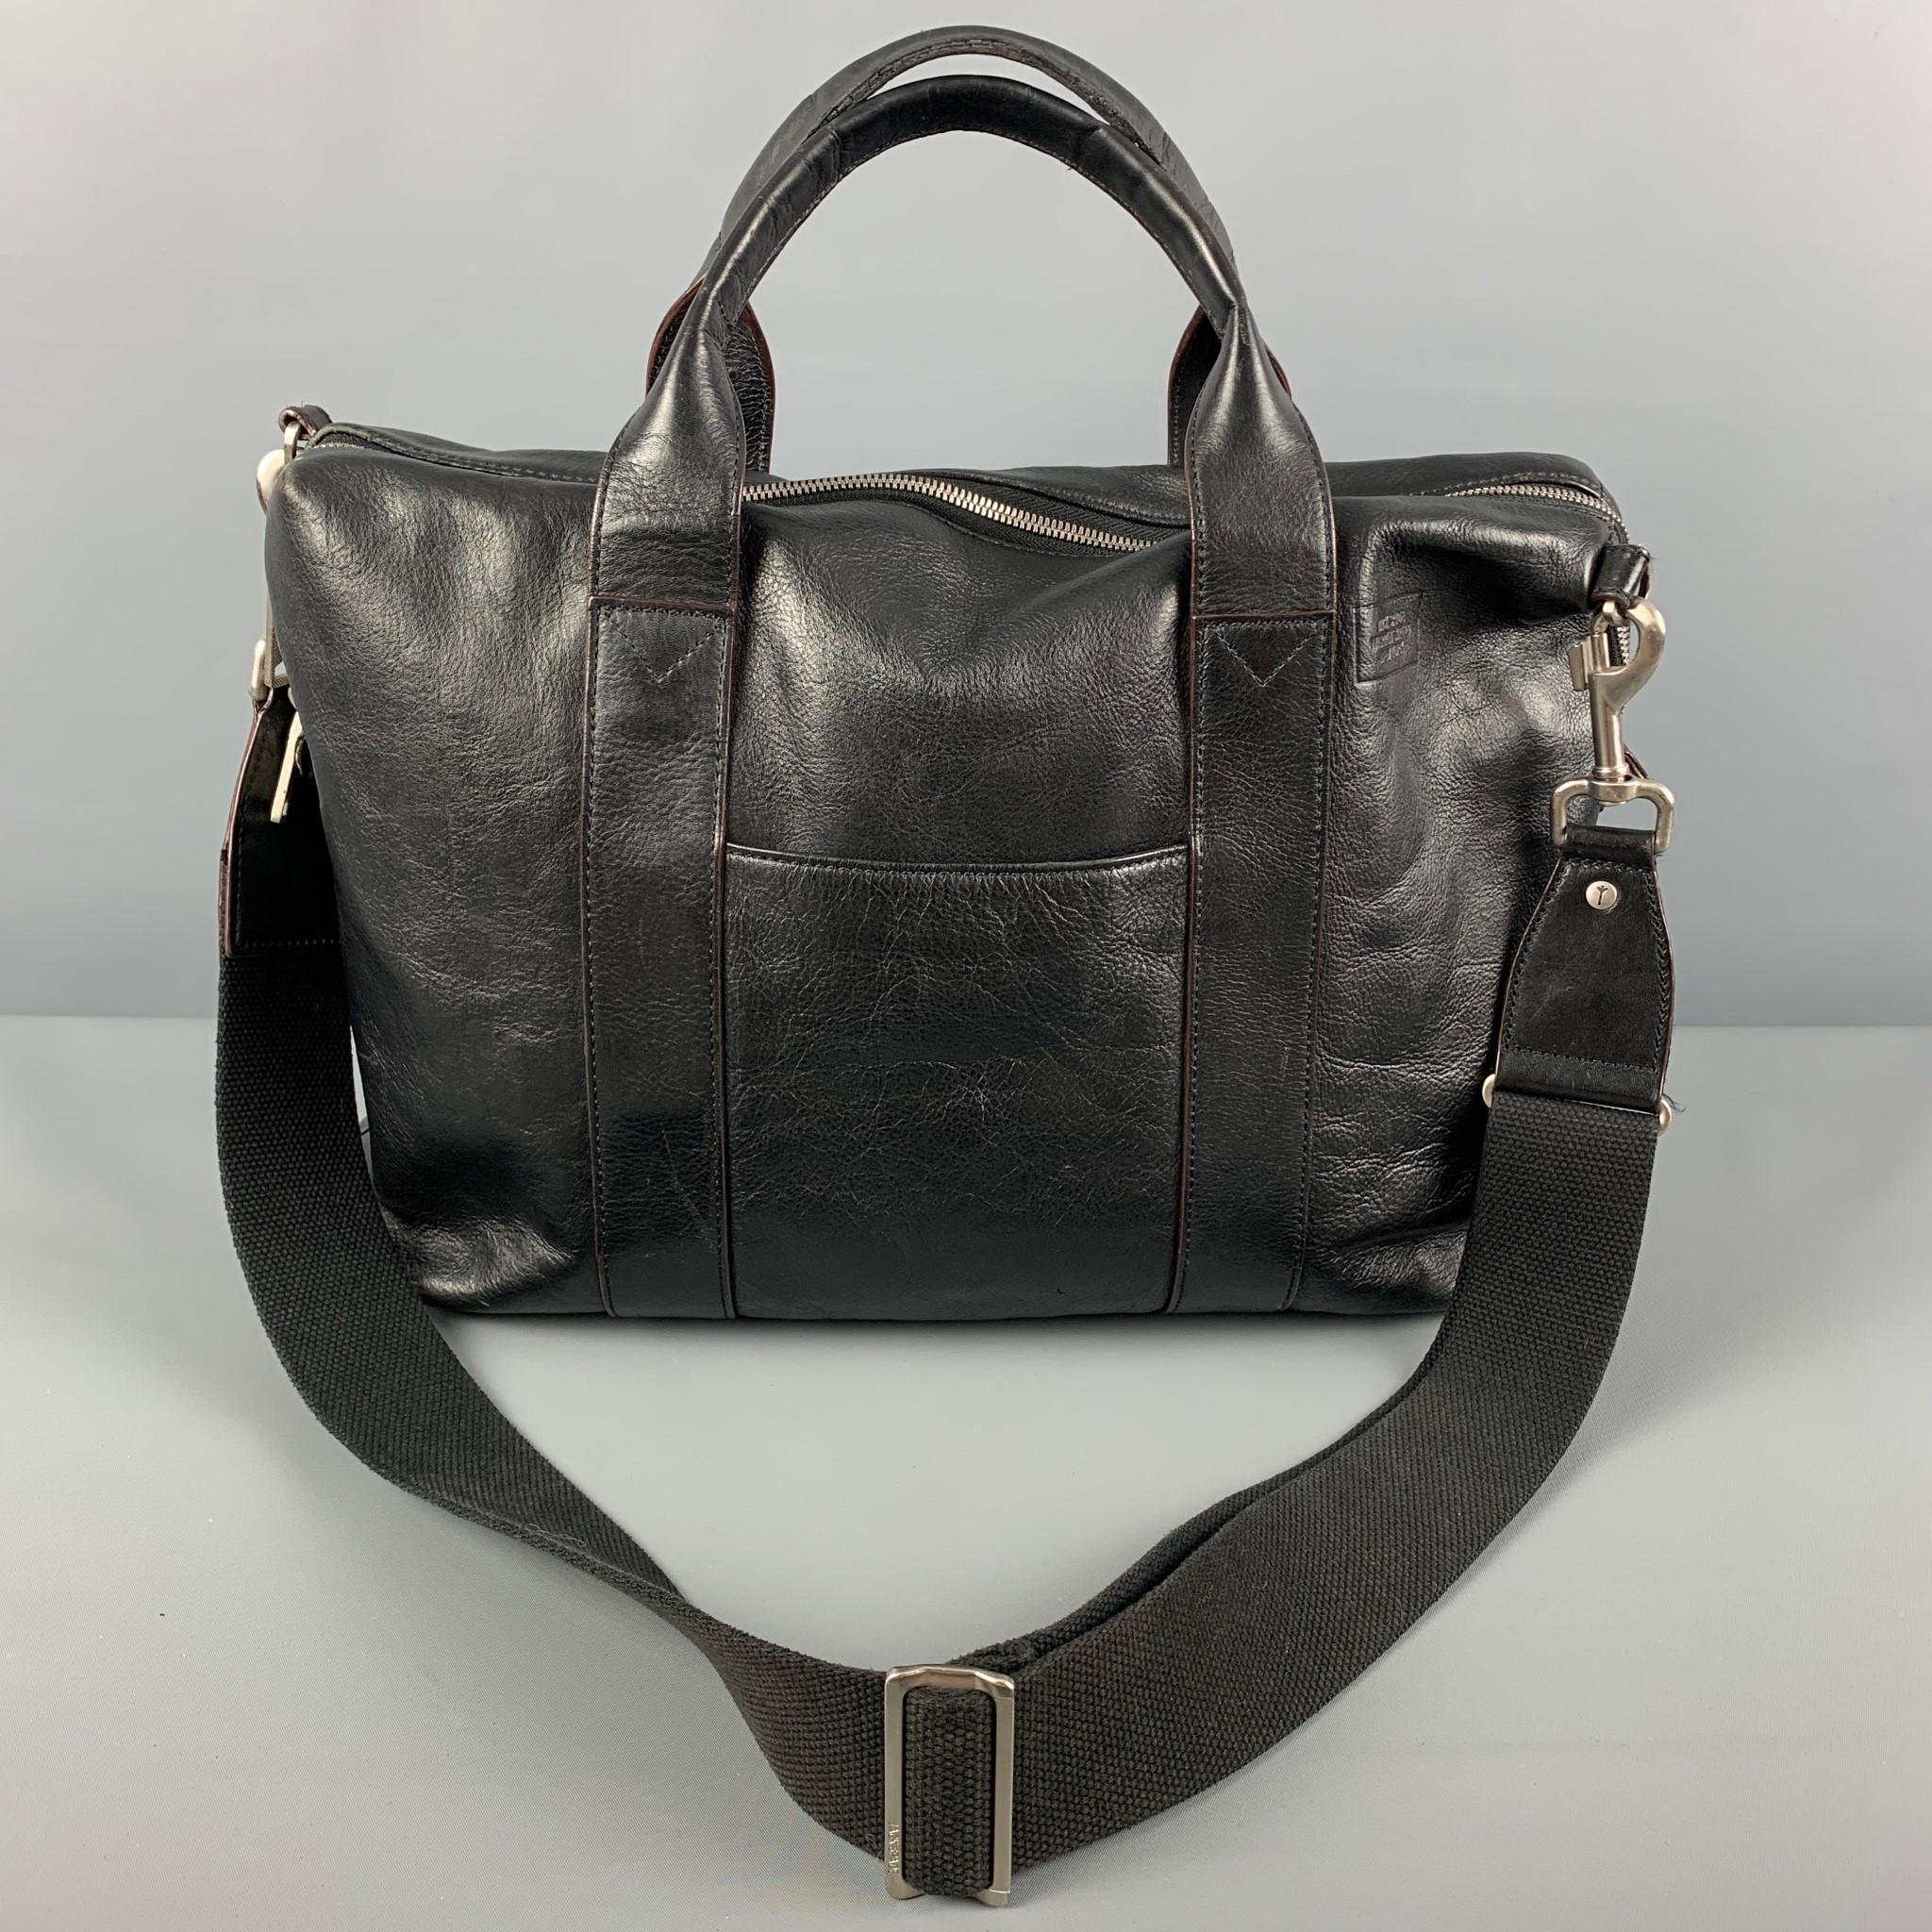 JACK SPADE bag comes in a black leather featuring a messenger style, top handles, detachable shoulder strap, inner pockets, and a top zipper closure. 

Good Pre-Owned Condition.

Measurements:

Length: 16 in.
Width: 3 in.
Height: 12.5 in.
Drop: 20